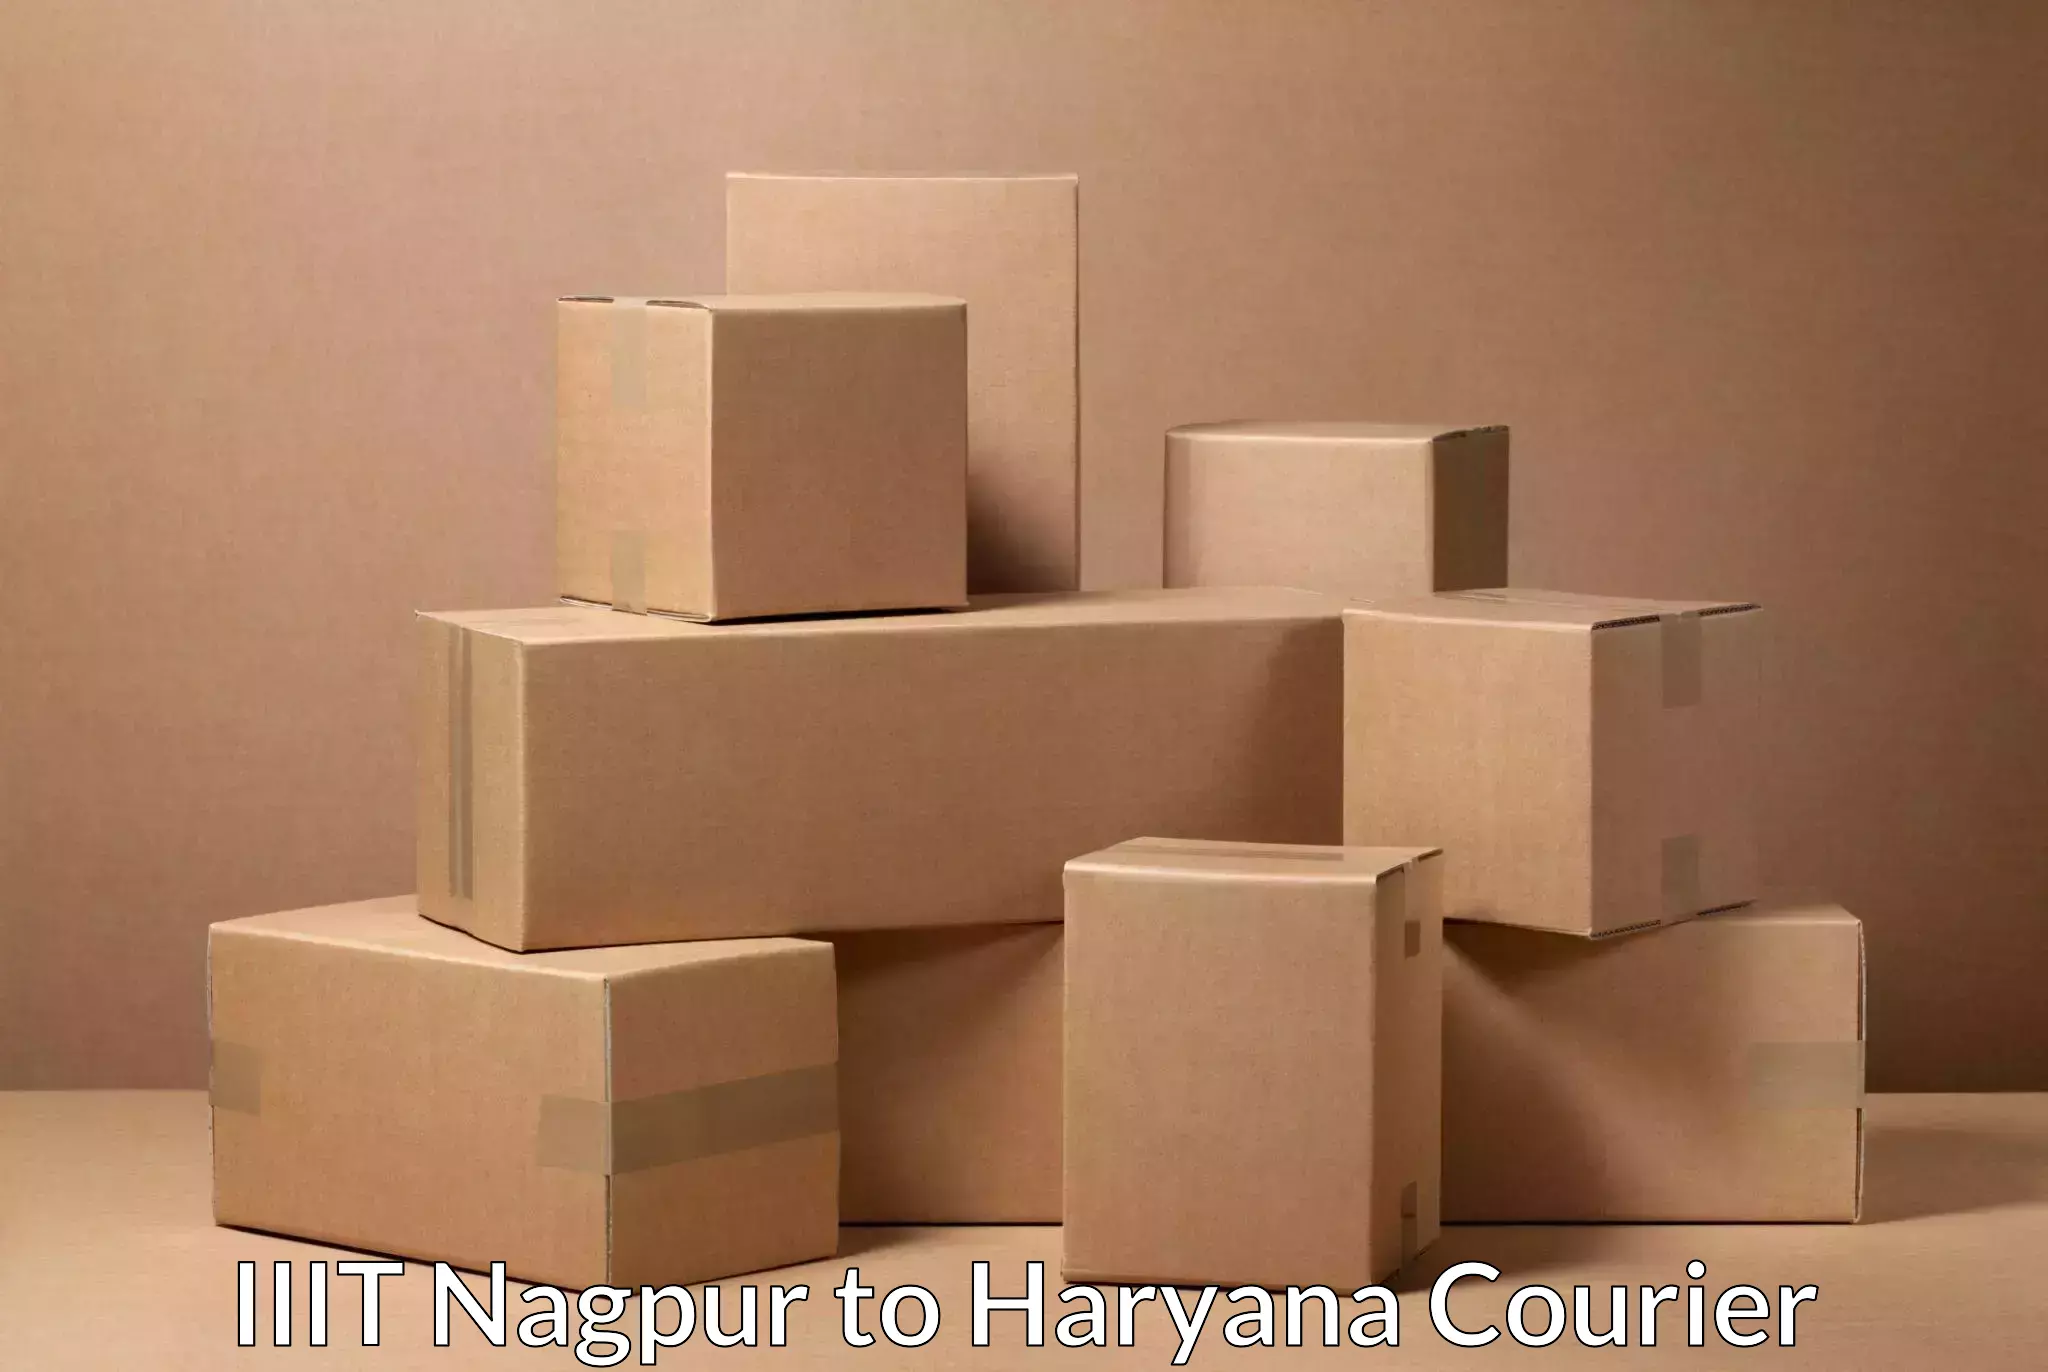 Express package transport in IIIT Nagpur to Sonipat